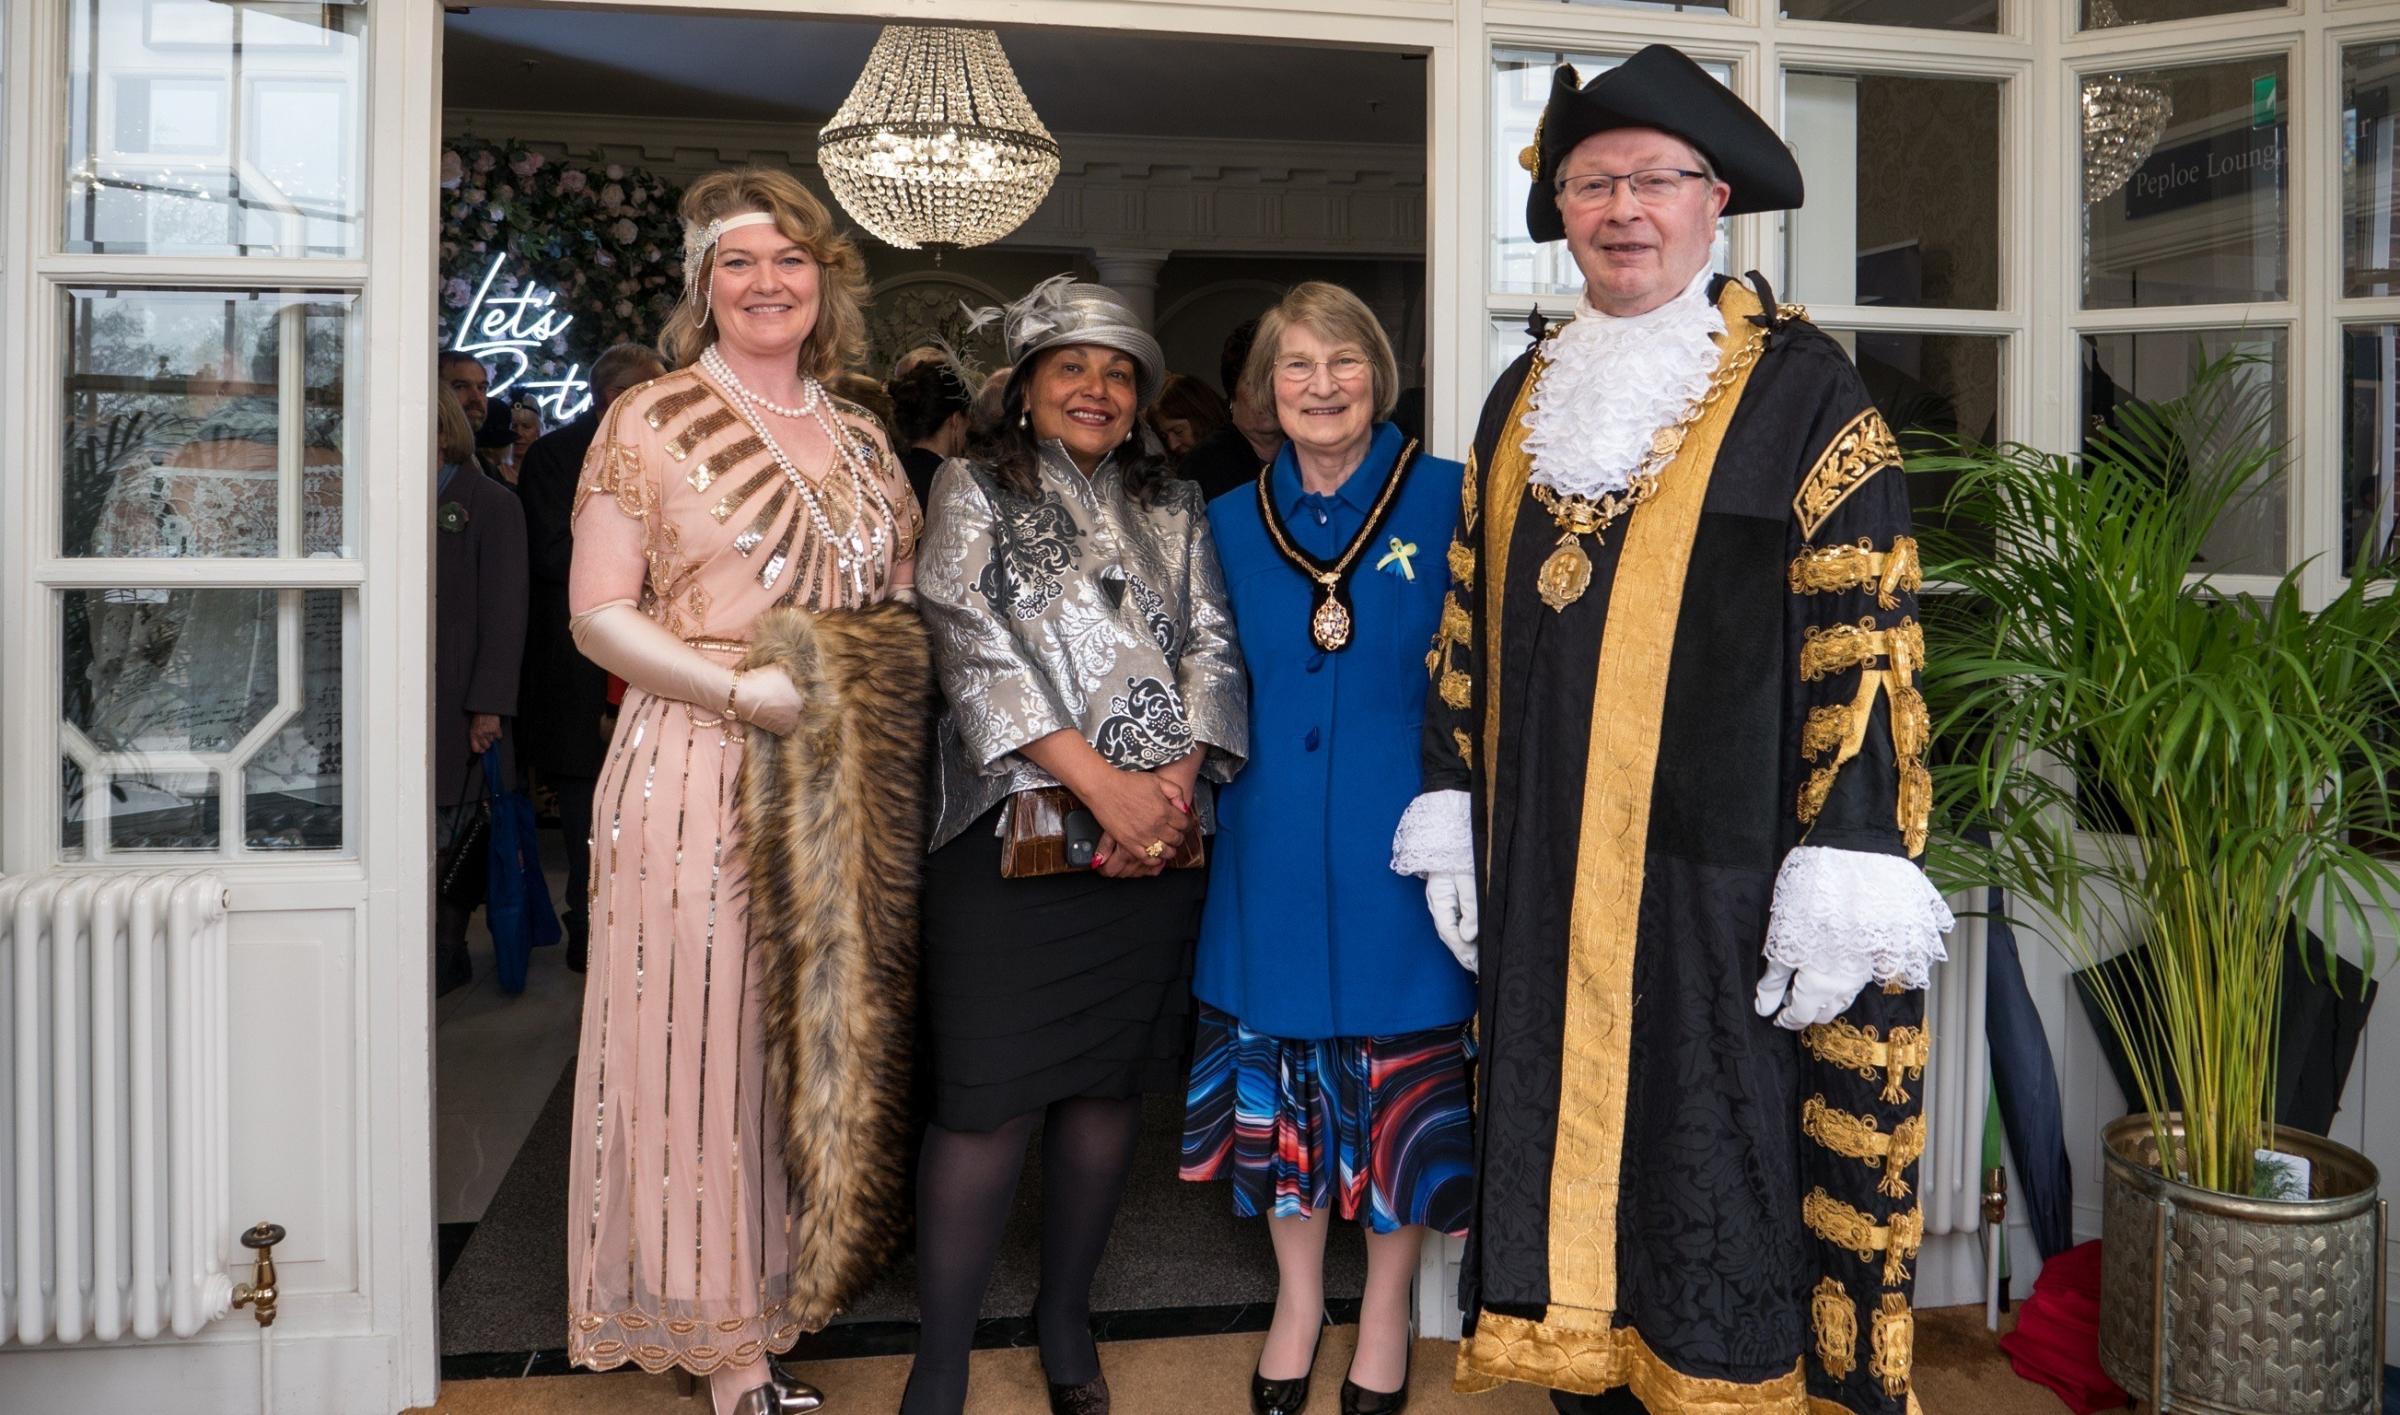 L-R Jan Chillery, Cllr Razia Daniels, Lady Mayoress Heather Leather, The Lord Mayor of Chester Cllr John Leather (Photo - Max Walker Williams).